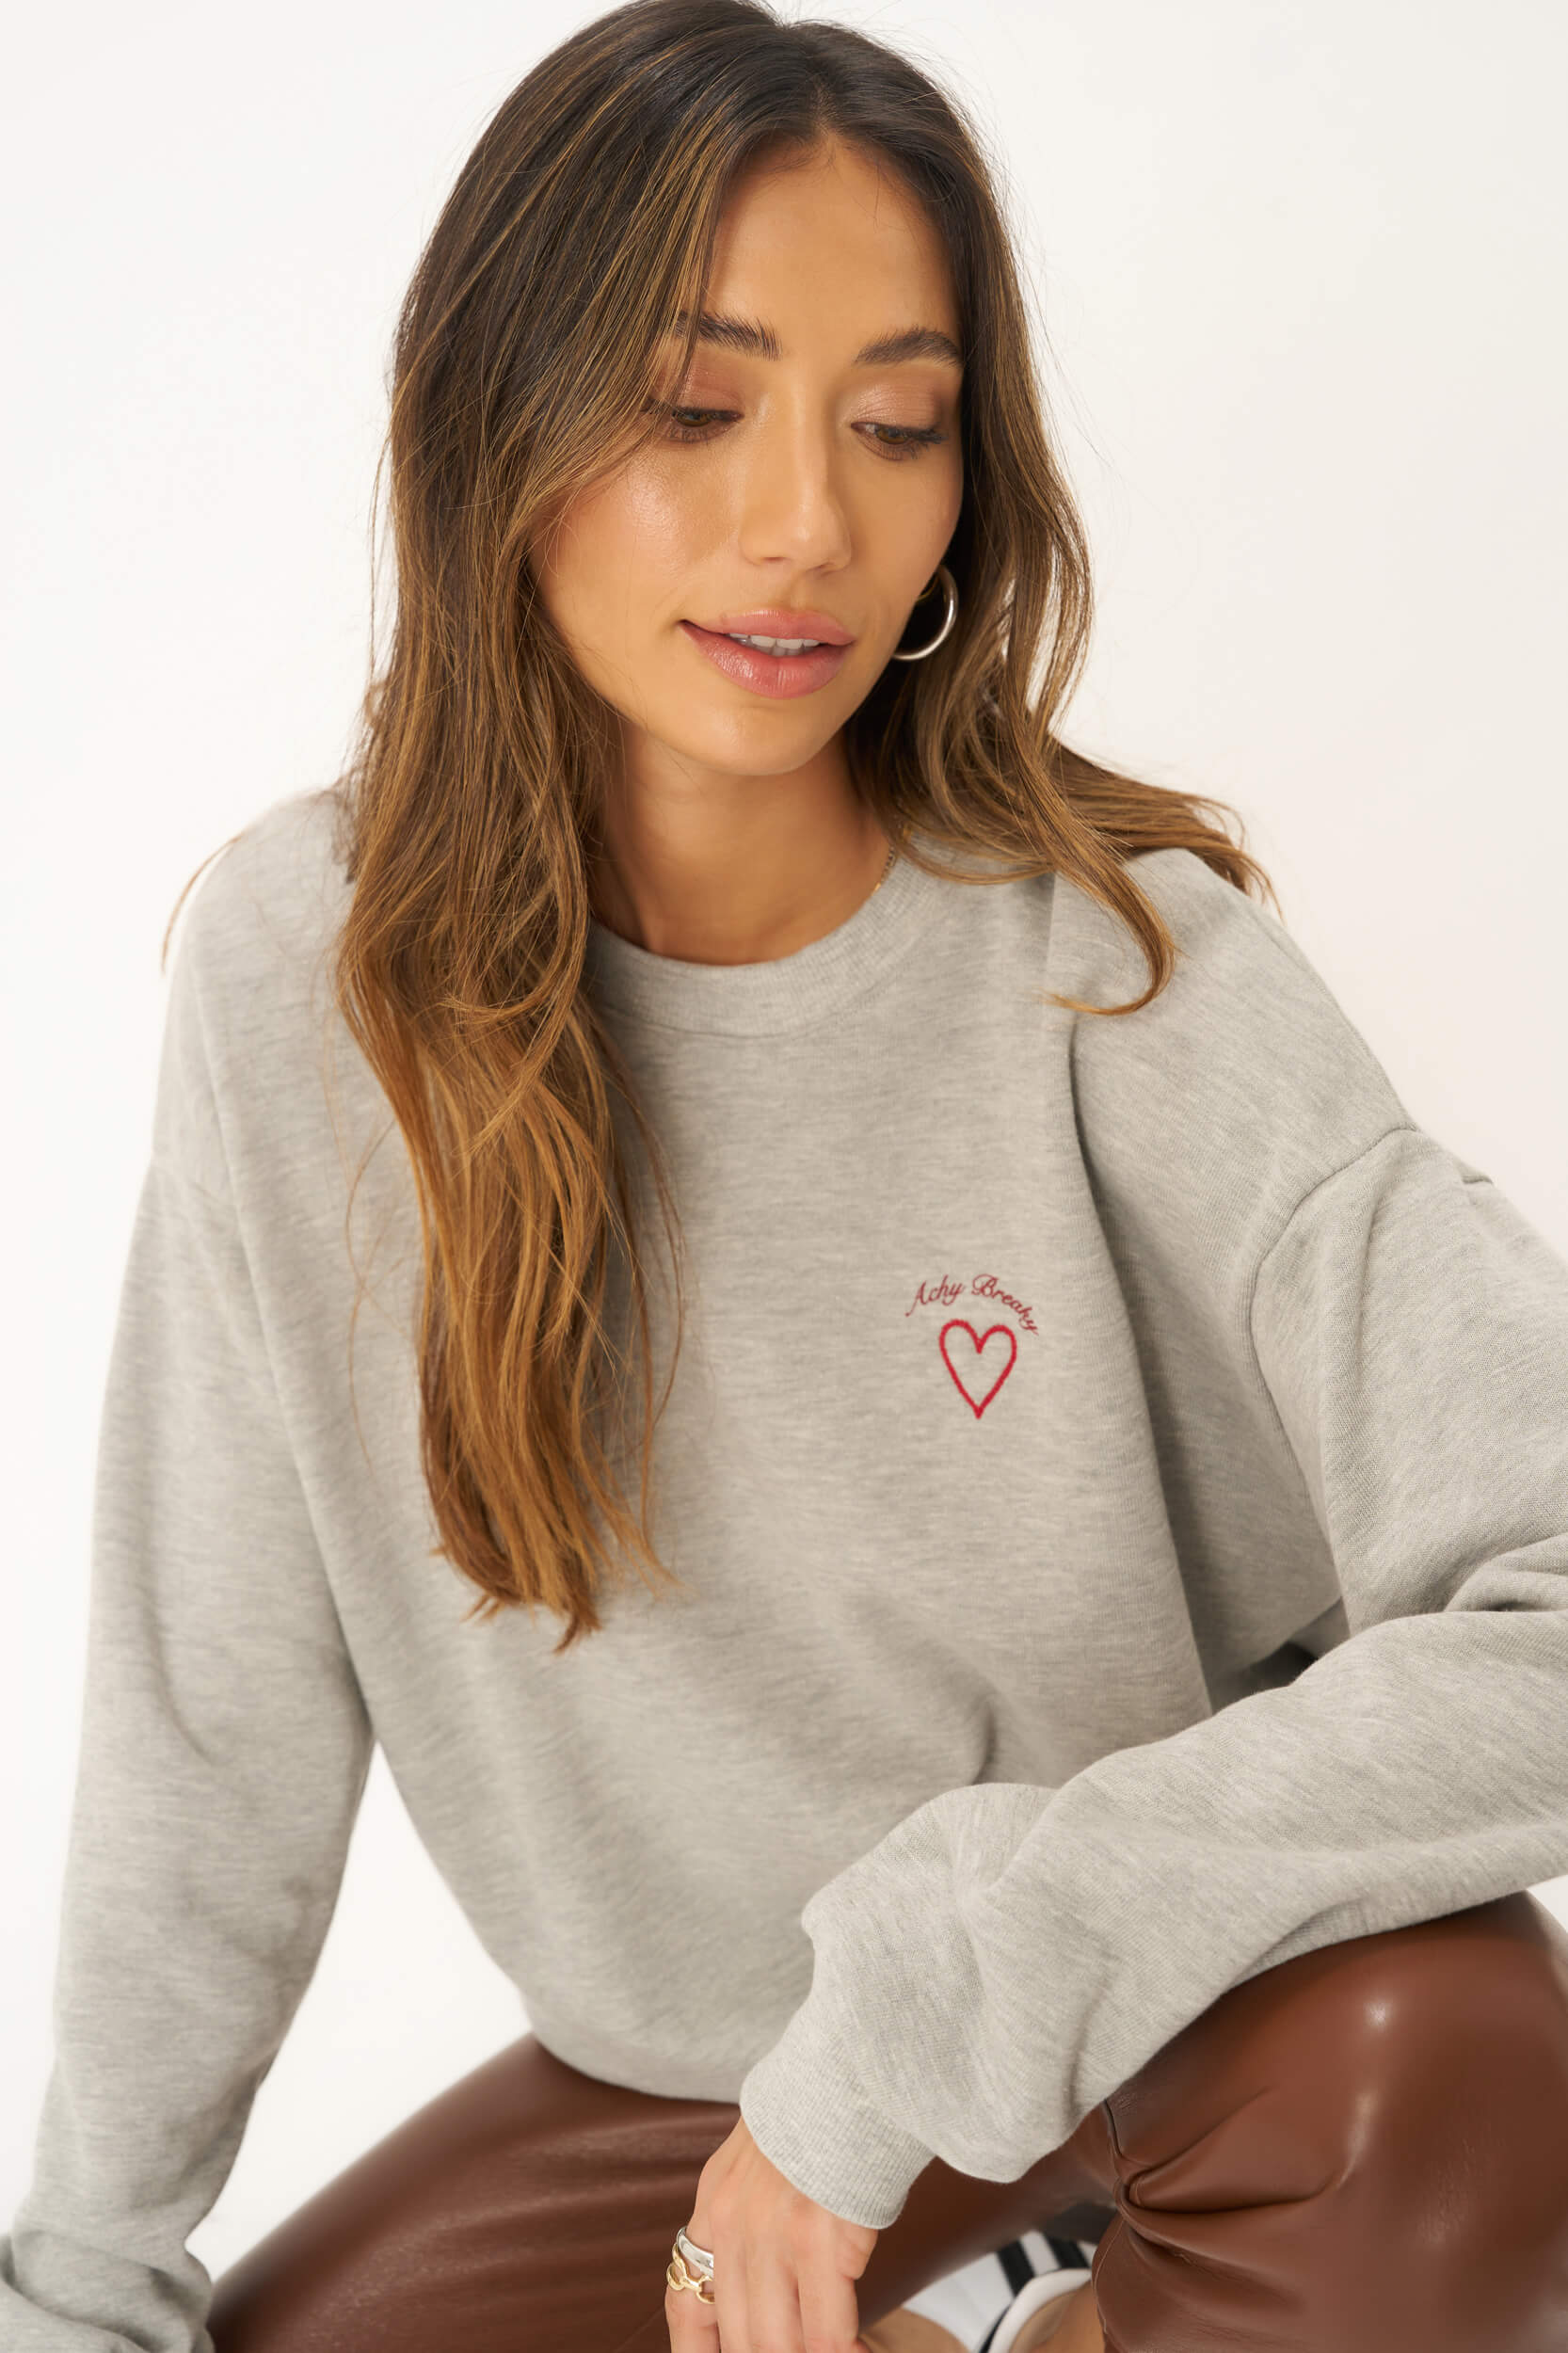 Embroidered PROJECT – Breaky Grey Achy - Sweatshirt Heather SOCIAL T